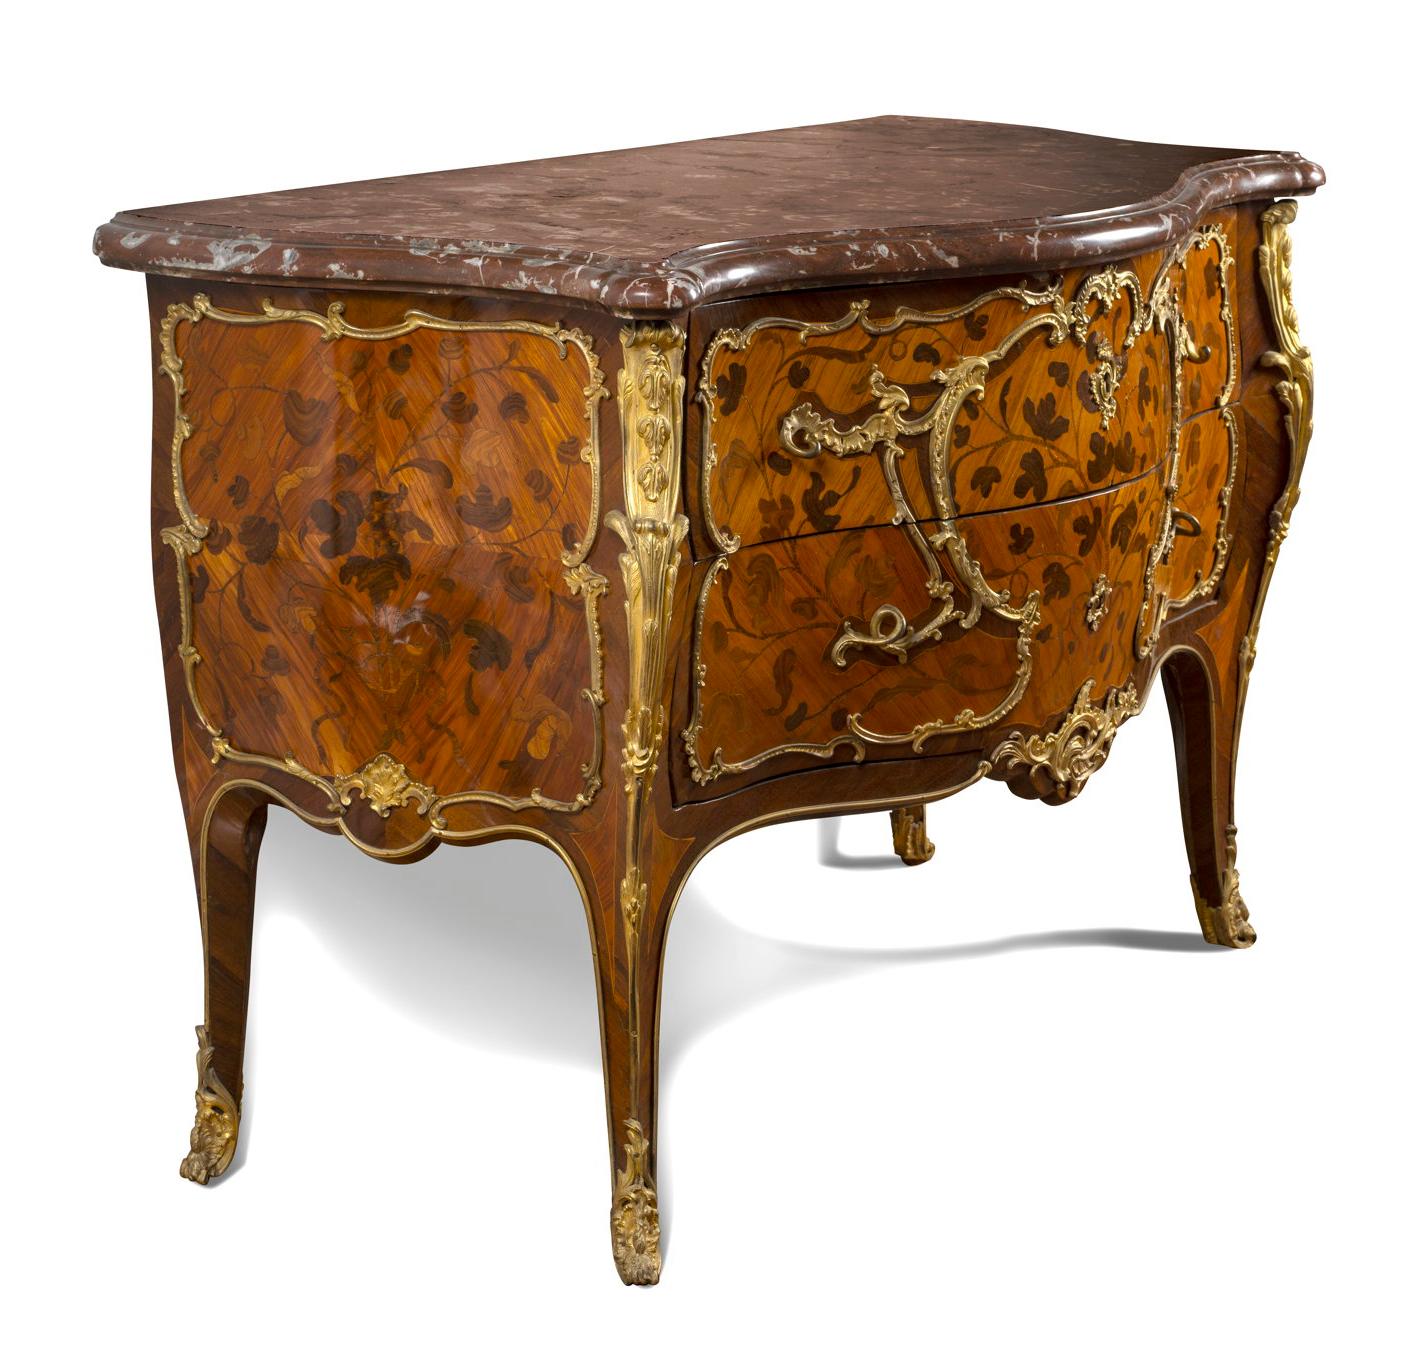 The serpentine molded ‘rouge royal’ marble above two long bombé-shaped drawers ‘sans traverse’ inlaid with bronzes and floral sprays, the sides decorated similarly, on splayed legs, the angles headed by floral-cast clasps and reaching to floral-cast